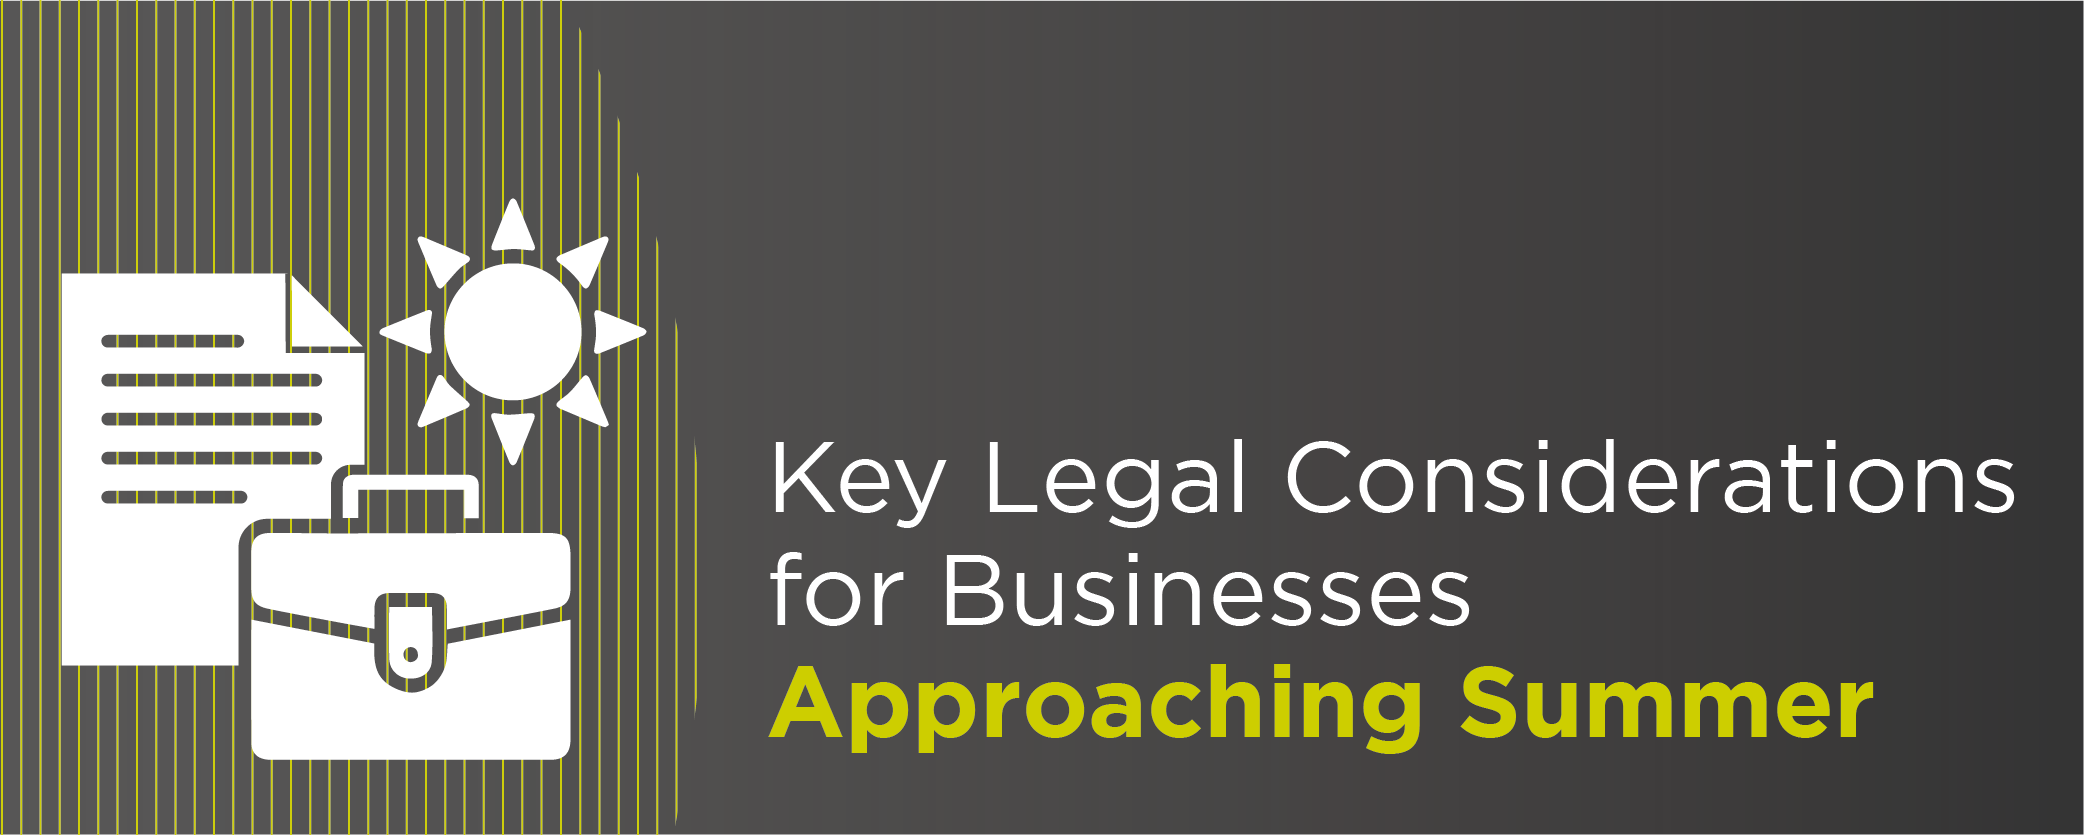 Key Legal Considerations for Businesses Approaching Summer